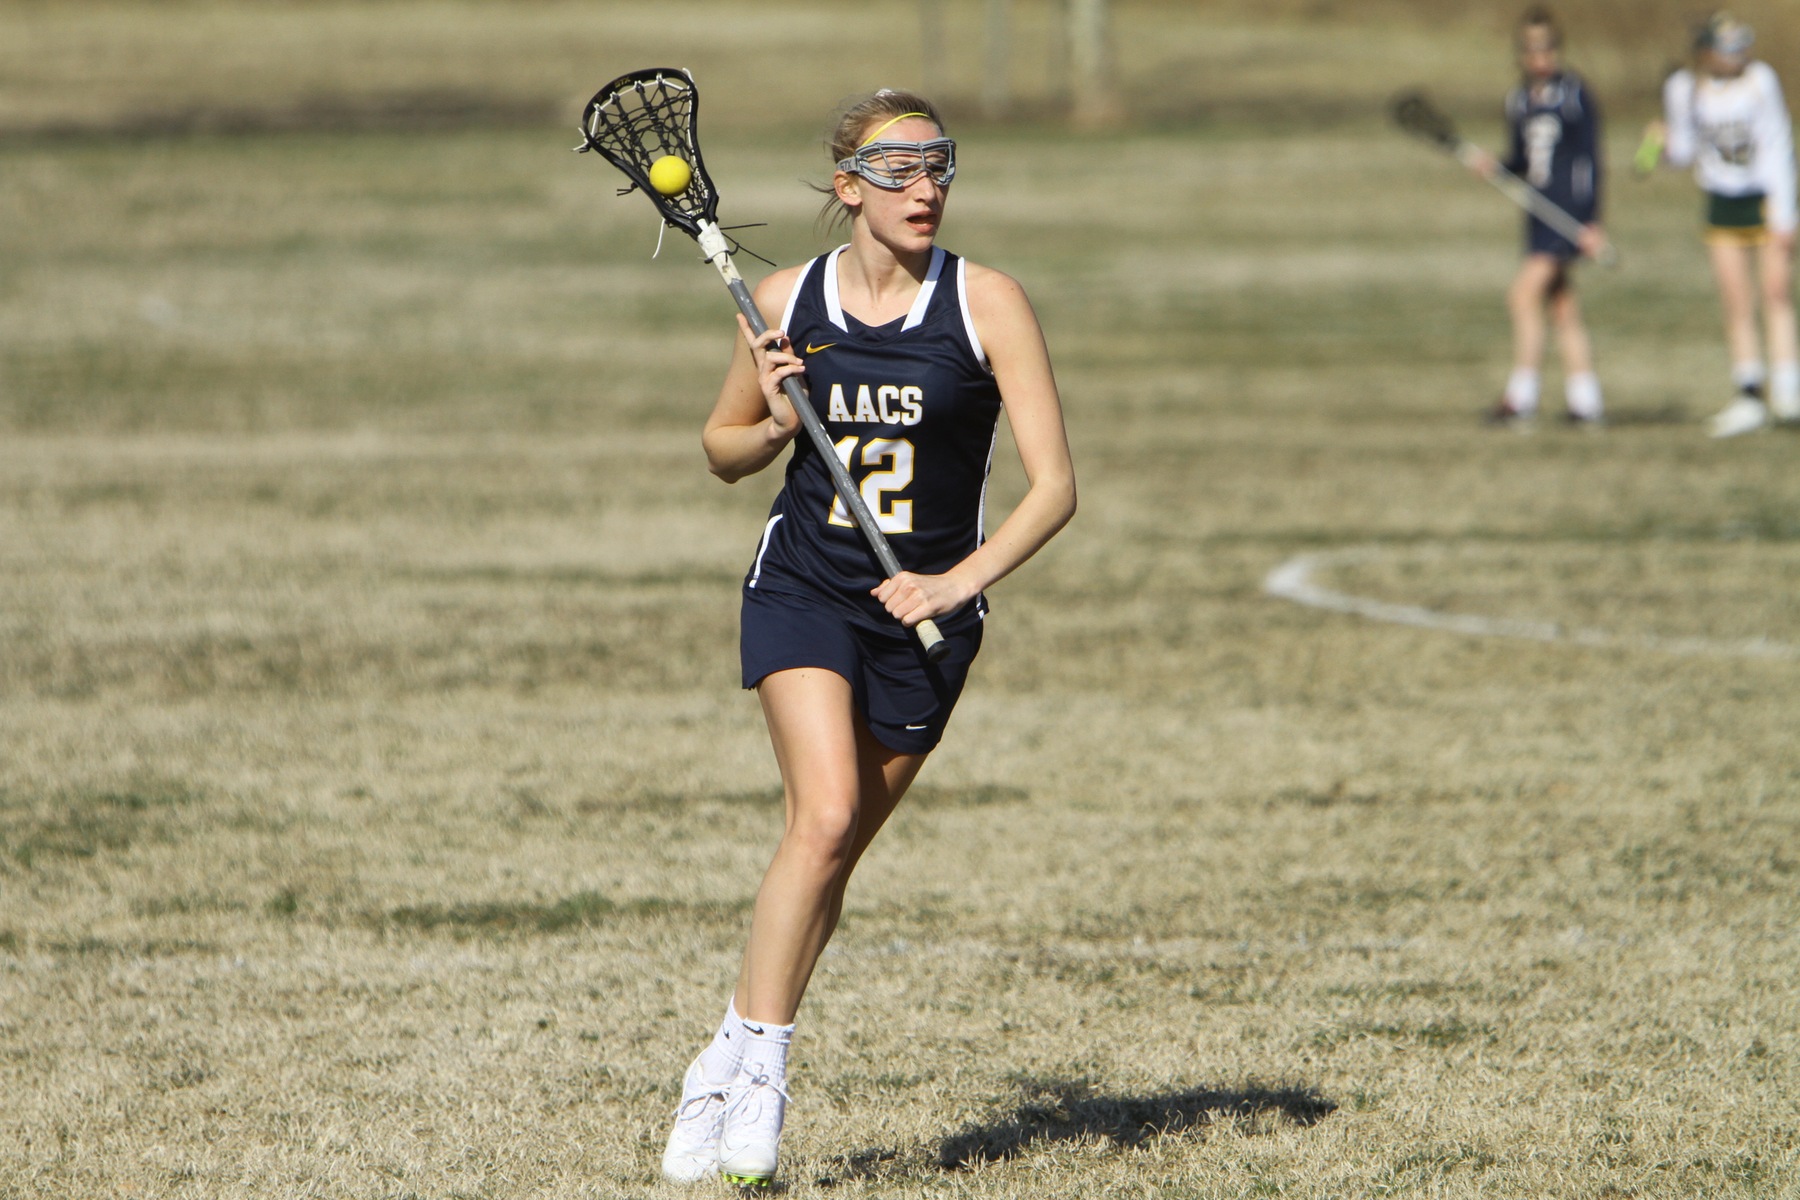 AACS Scores In Final Seconds To Win